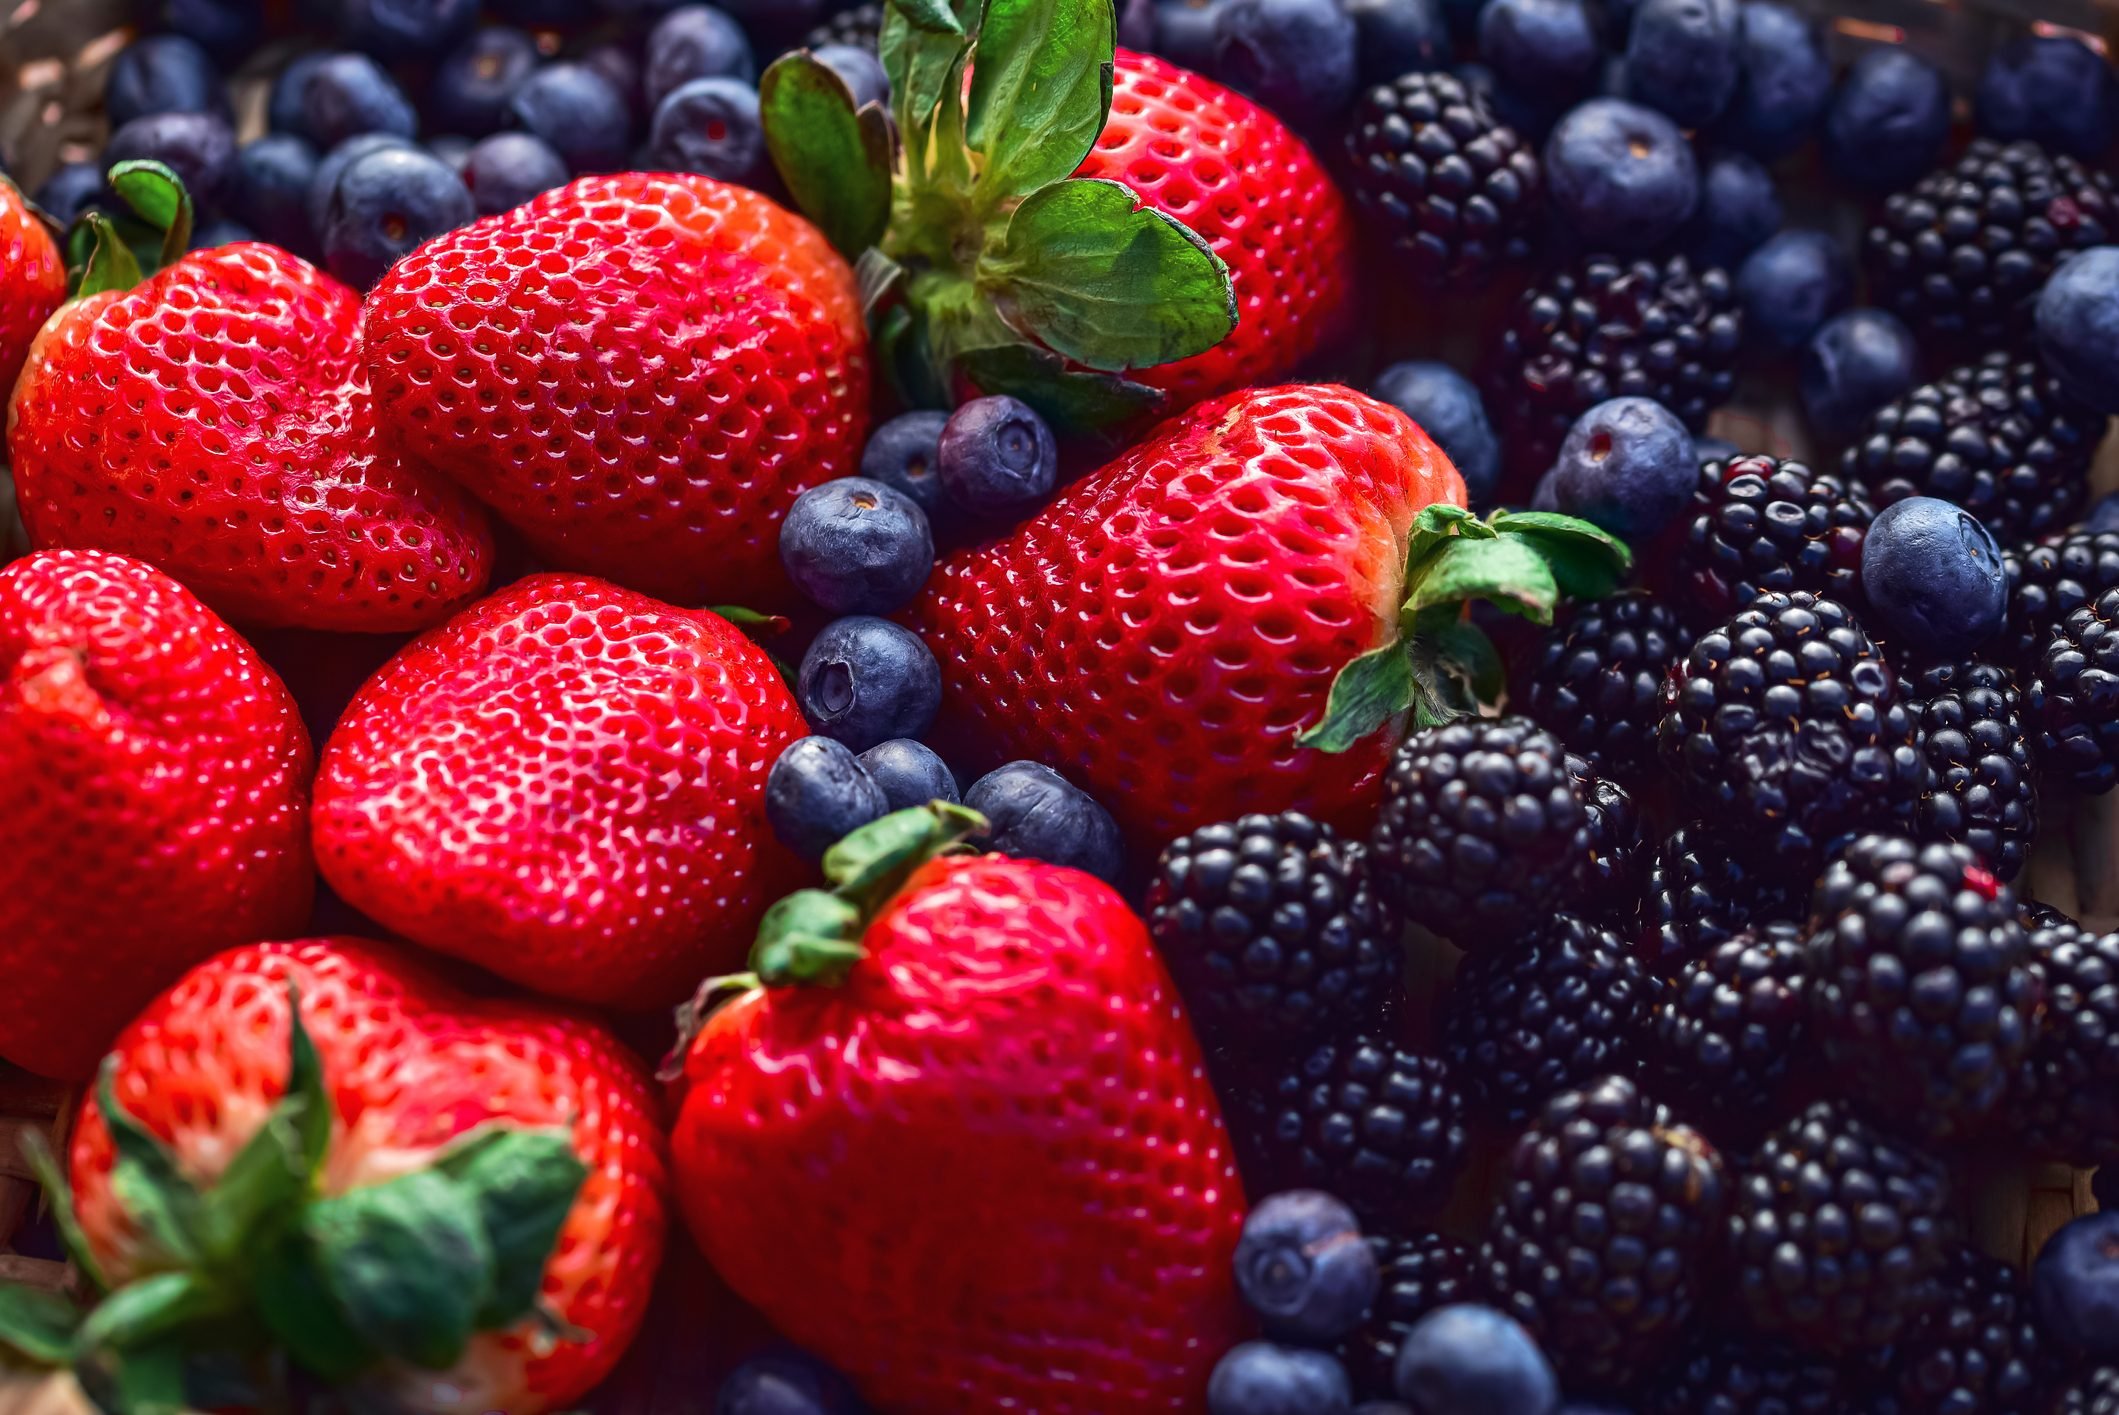 Eating This Berry Can Improve Your Heart & Brain Health in 8 Weeks, New Study Says